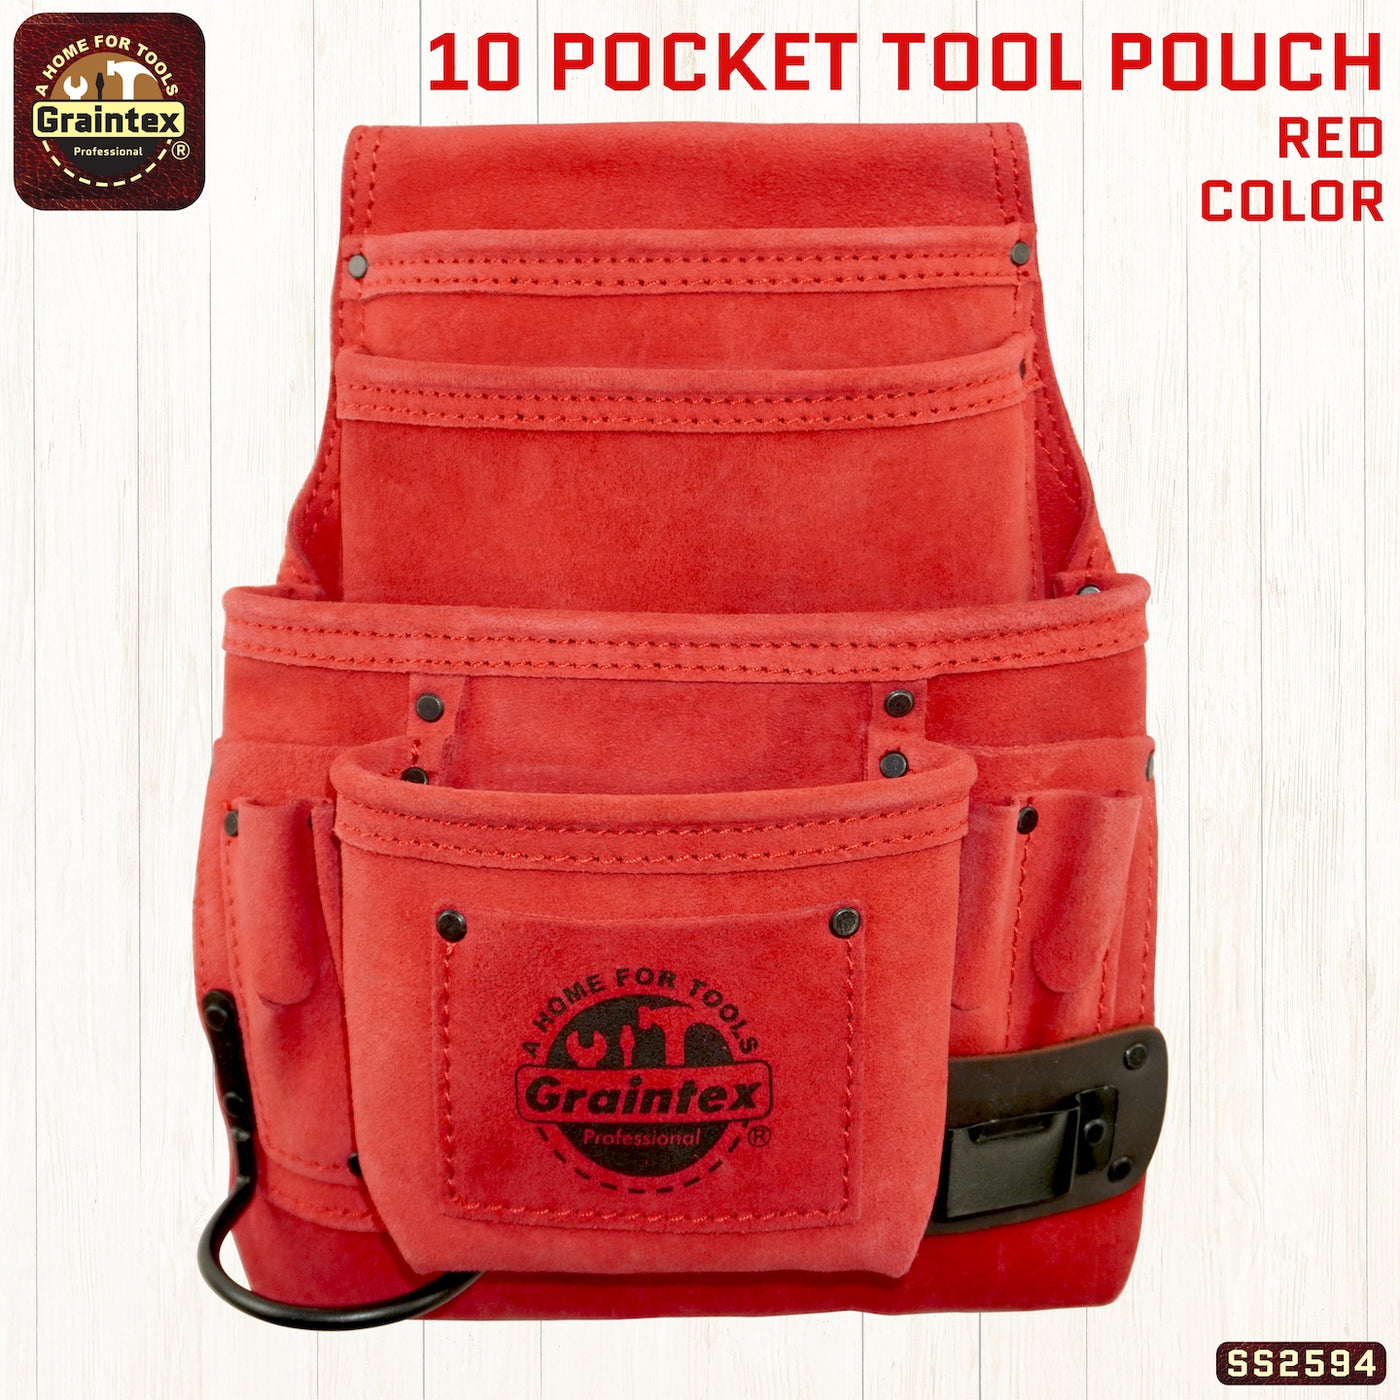 SS2594 :: 10 Pocket Nail & Tool Pouch Red Color Suede Leather